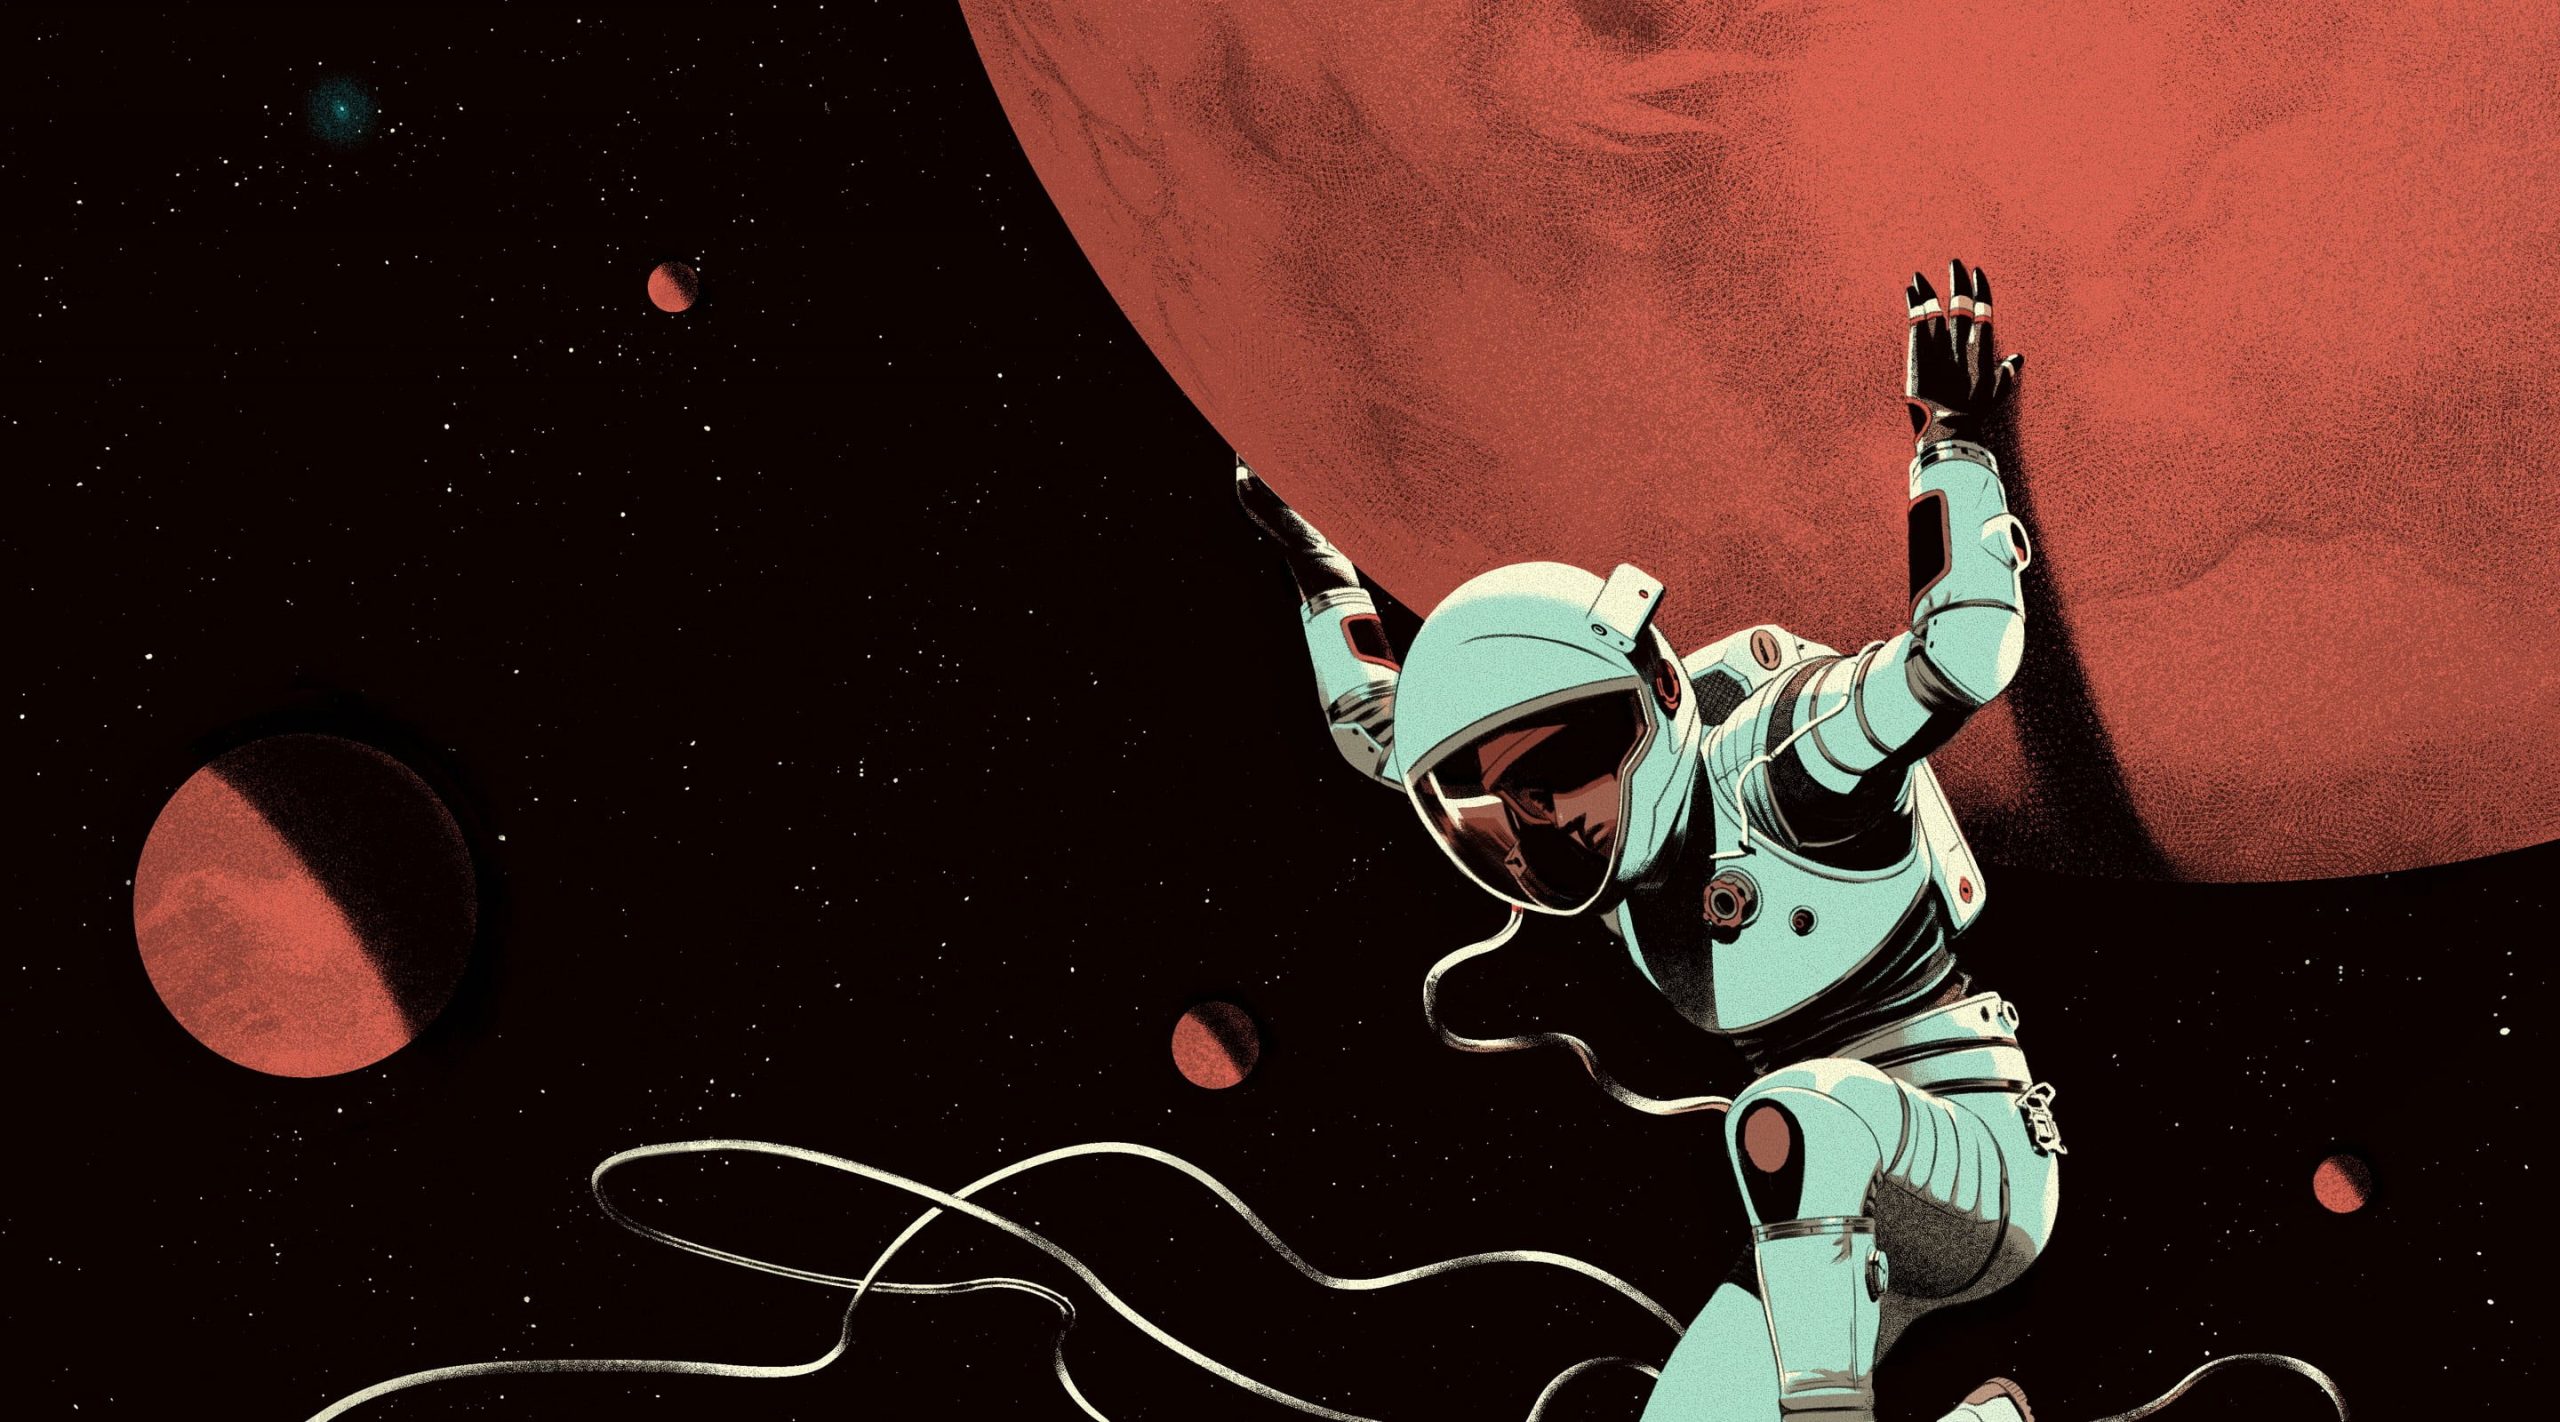 Astronaut carrying planet illustration